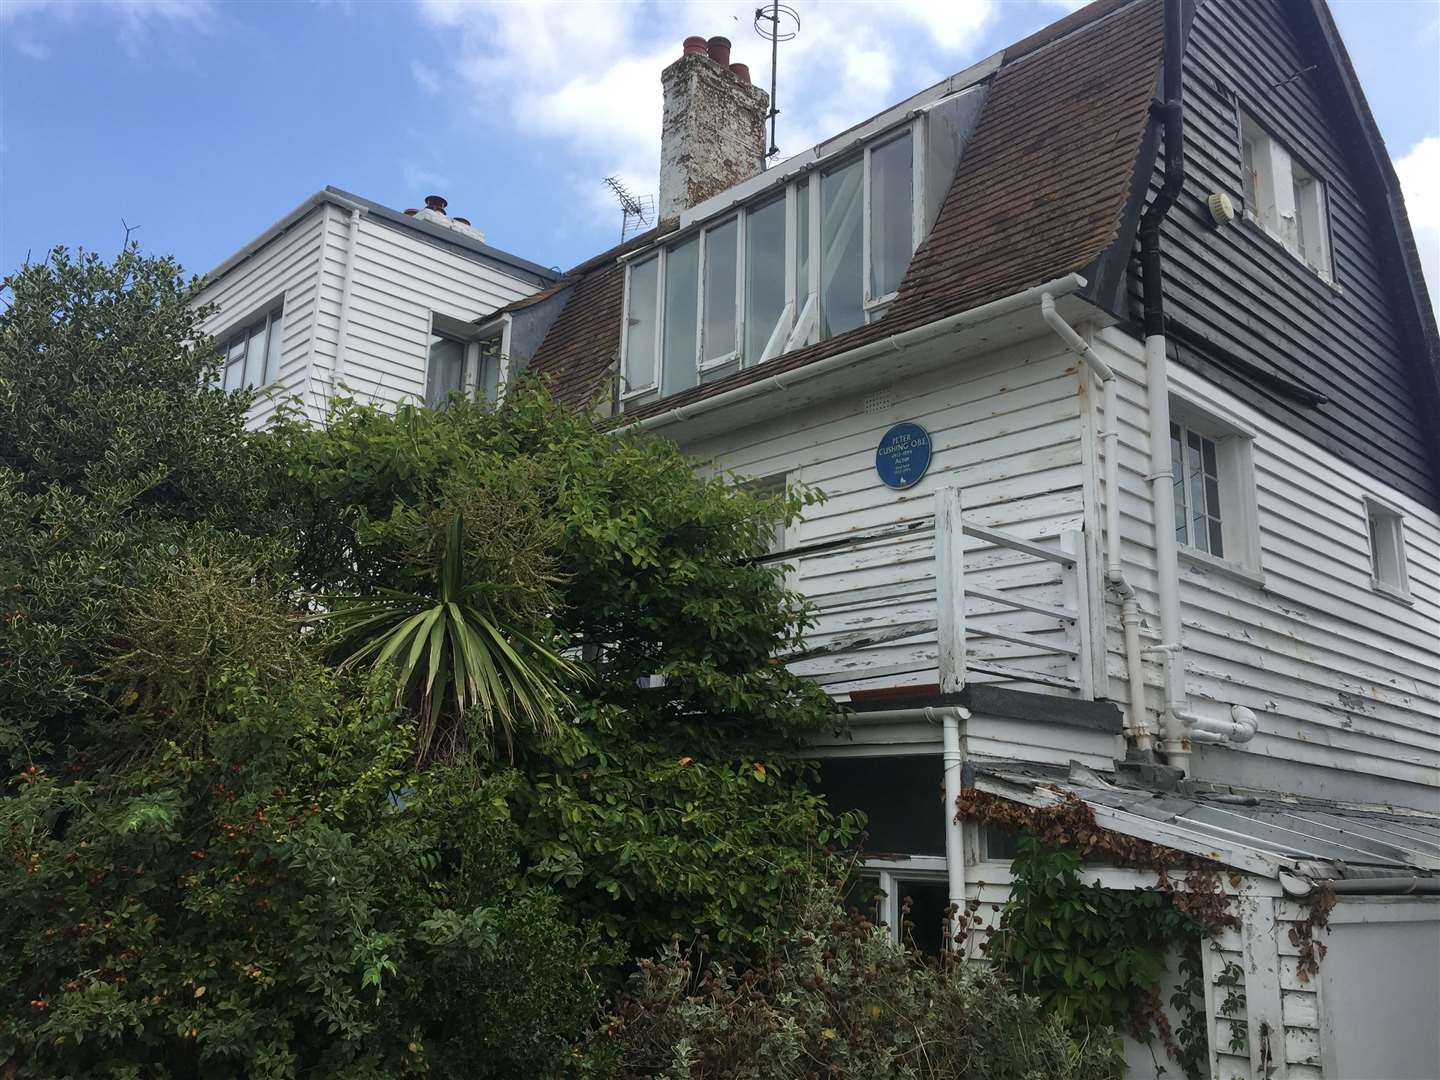 Star Wars and Hammer Horror actor Peter Cushing's former home near Island Wall in Whitstable